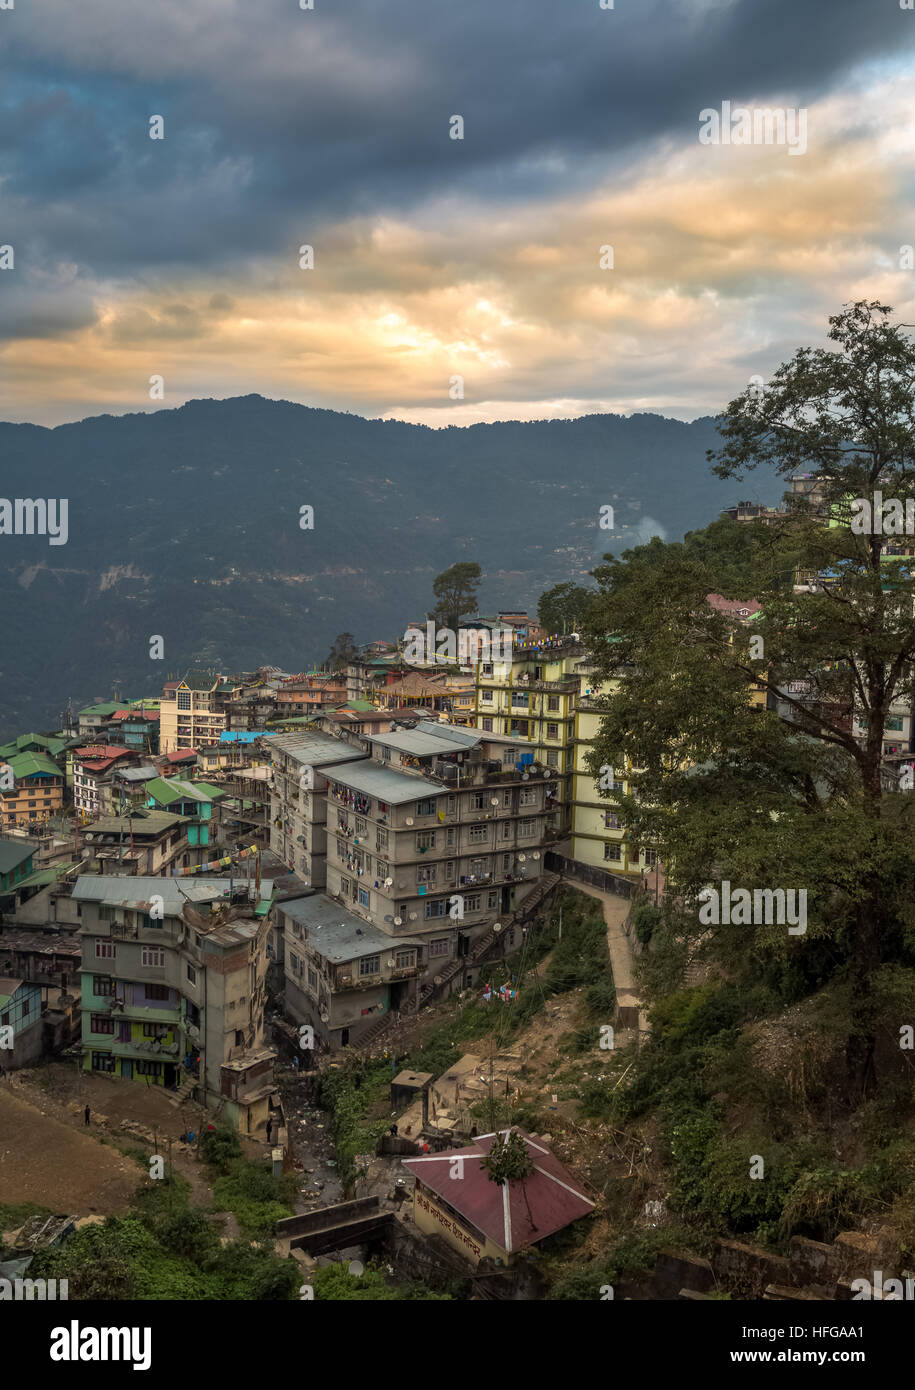 Sunset over Himalayan city of Gangtok, with vibrant sky distant mountains and buildings. Sikkim, India. Stock Photo